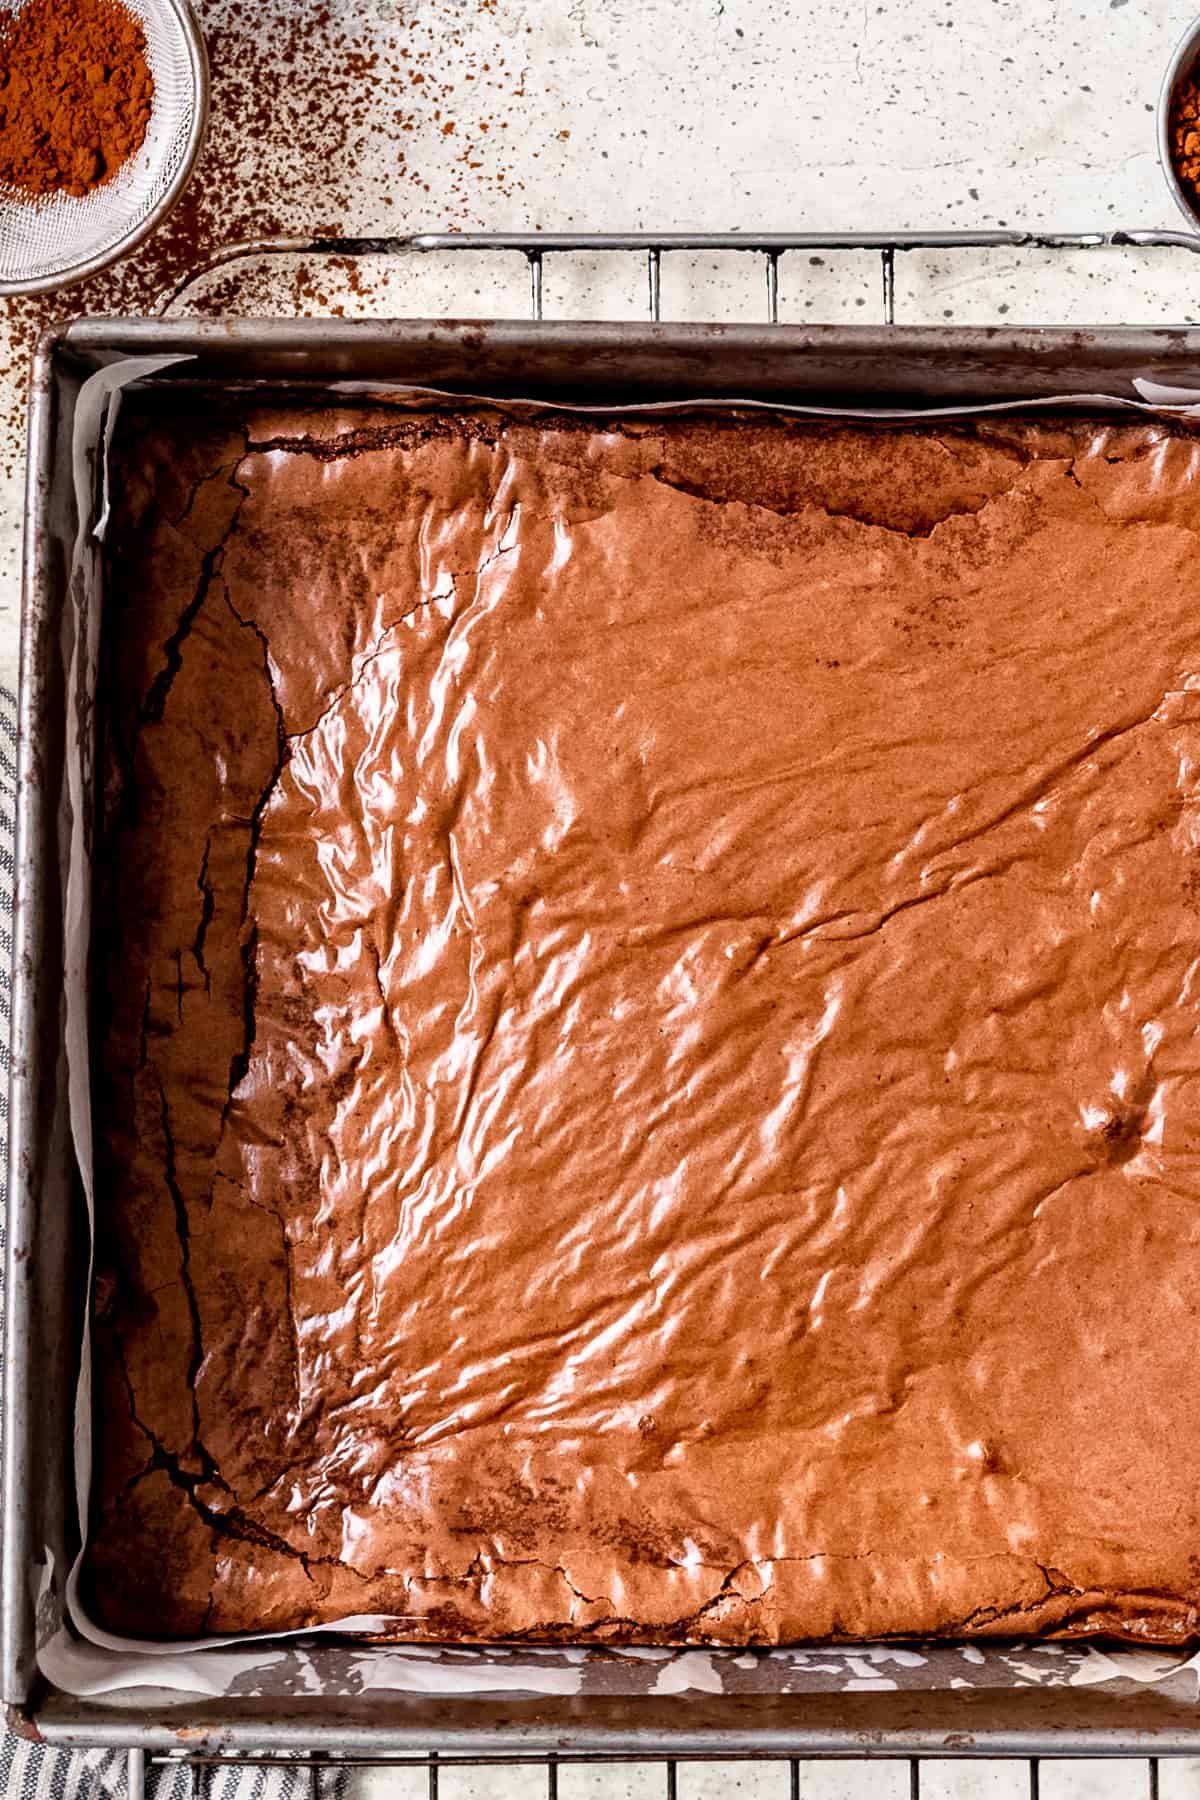 A tray of brownies with a shiny topping.